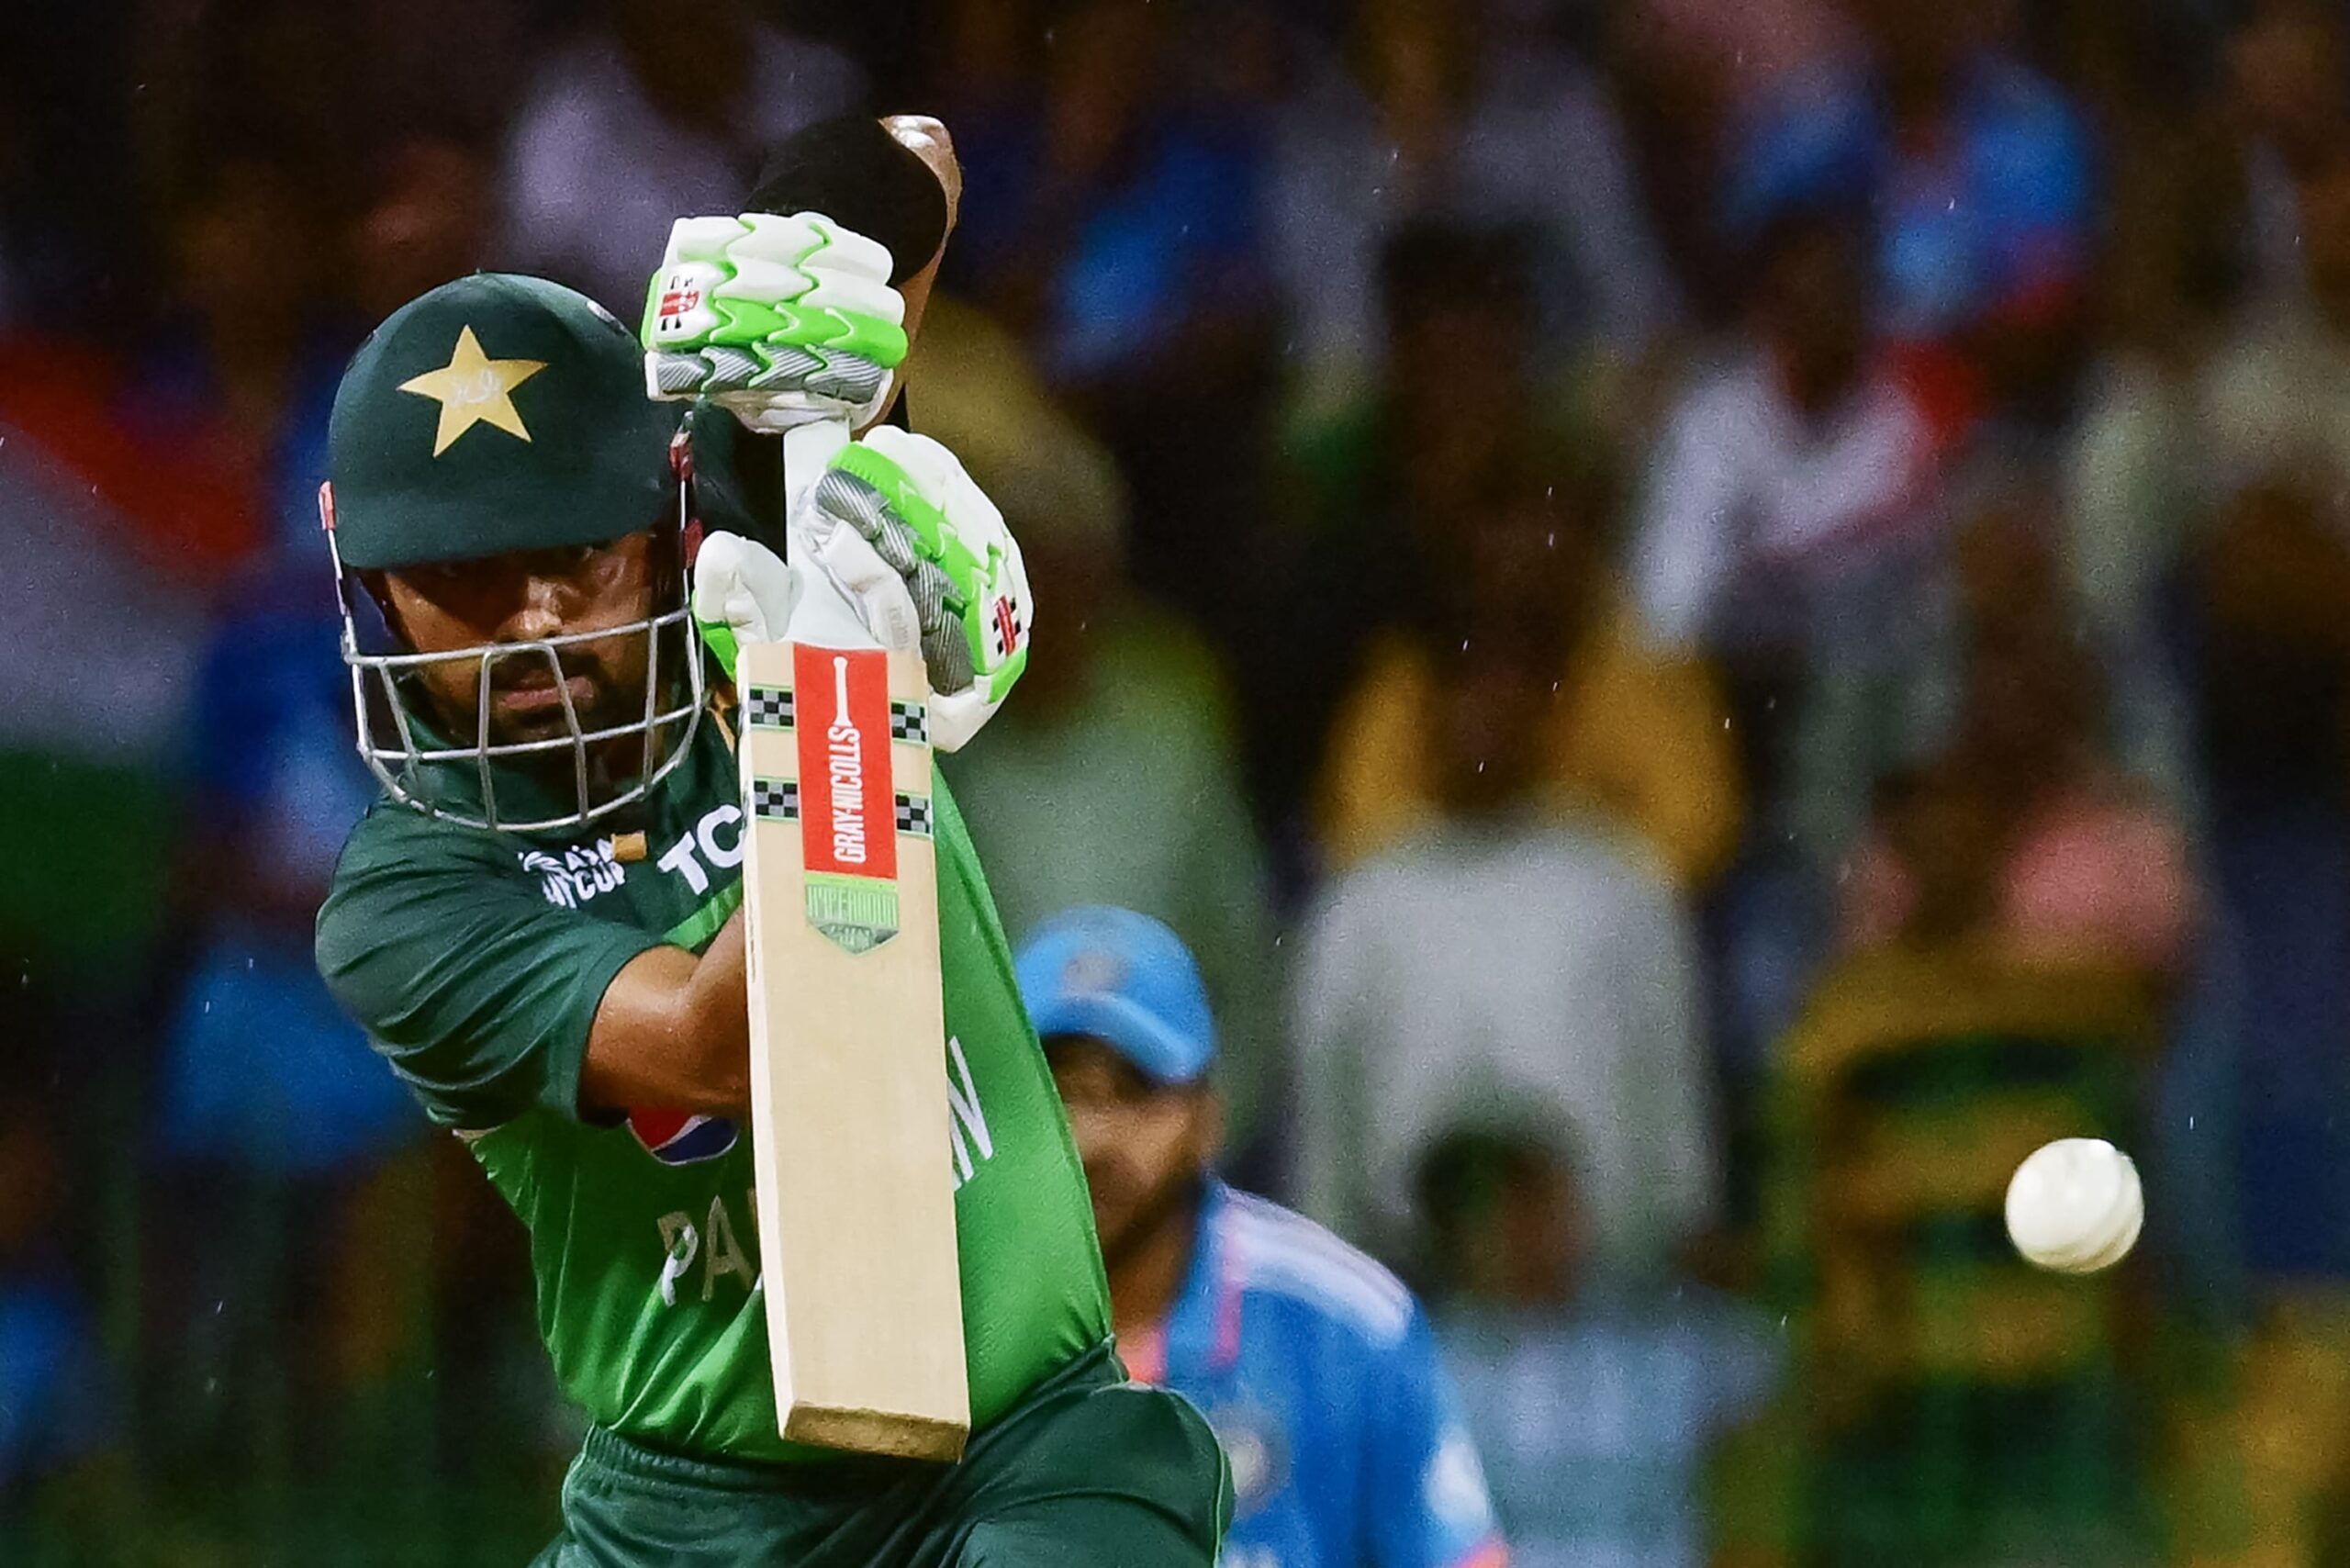 “After The India Match, We Were…”: Pakistan Coach On Team Morale Ahead Of Sri Lanka Clash